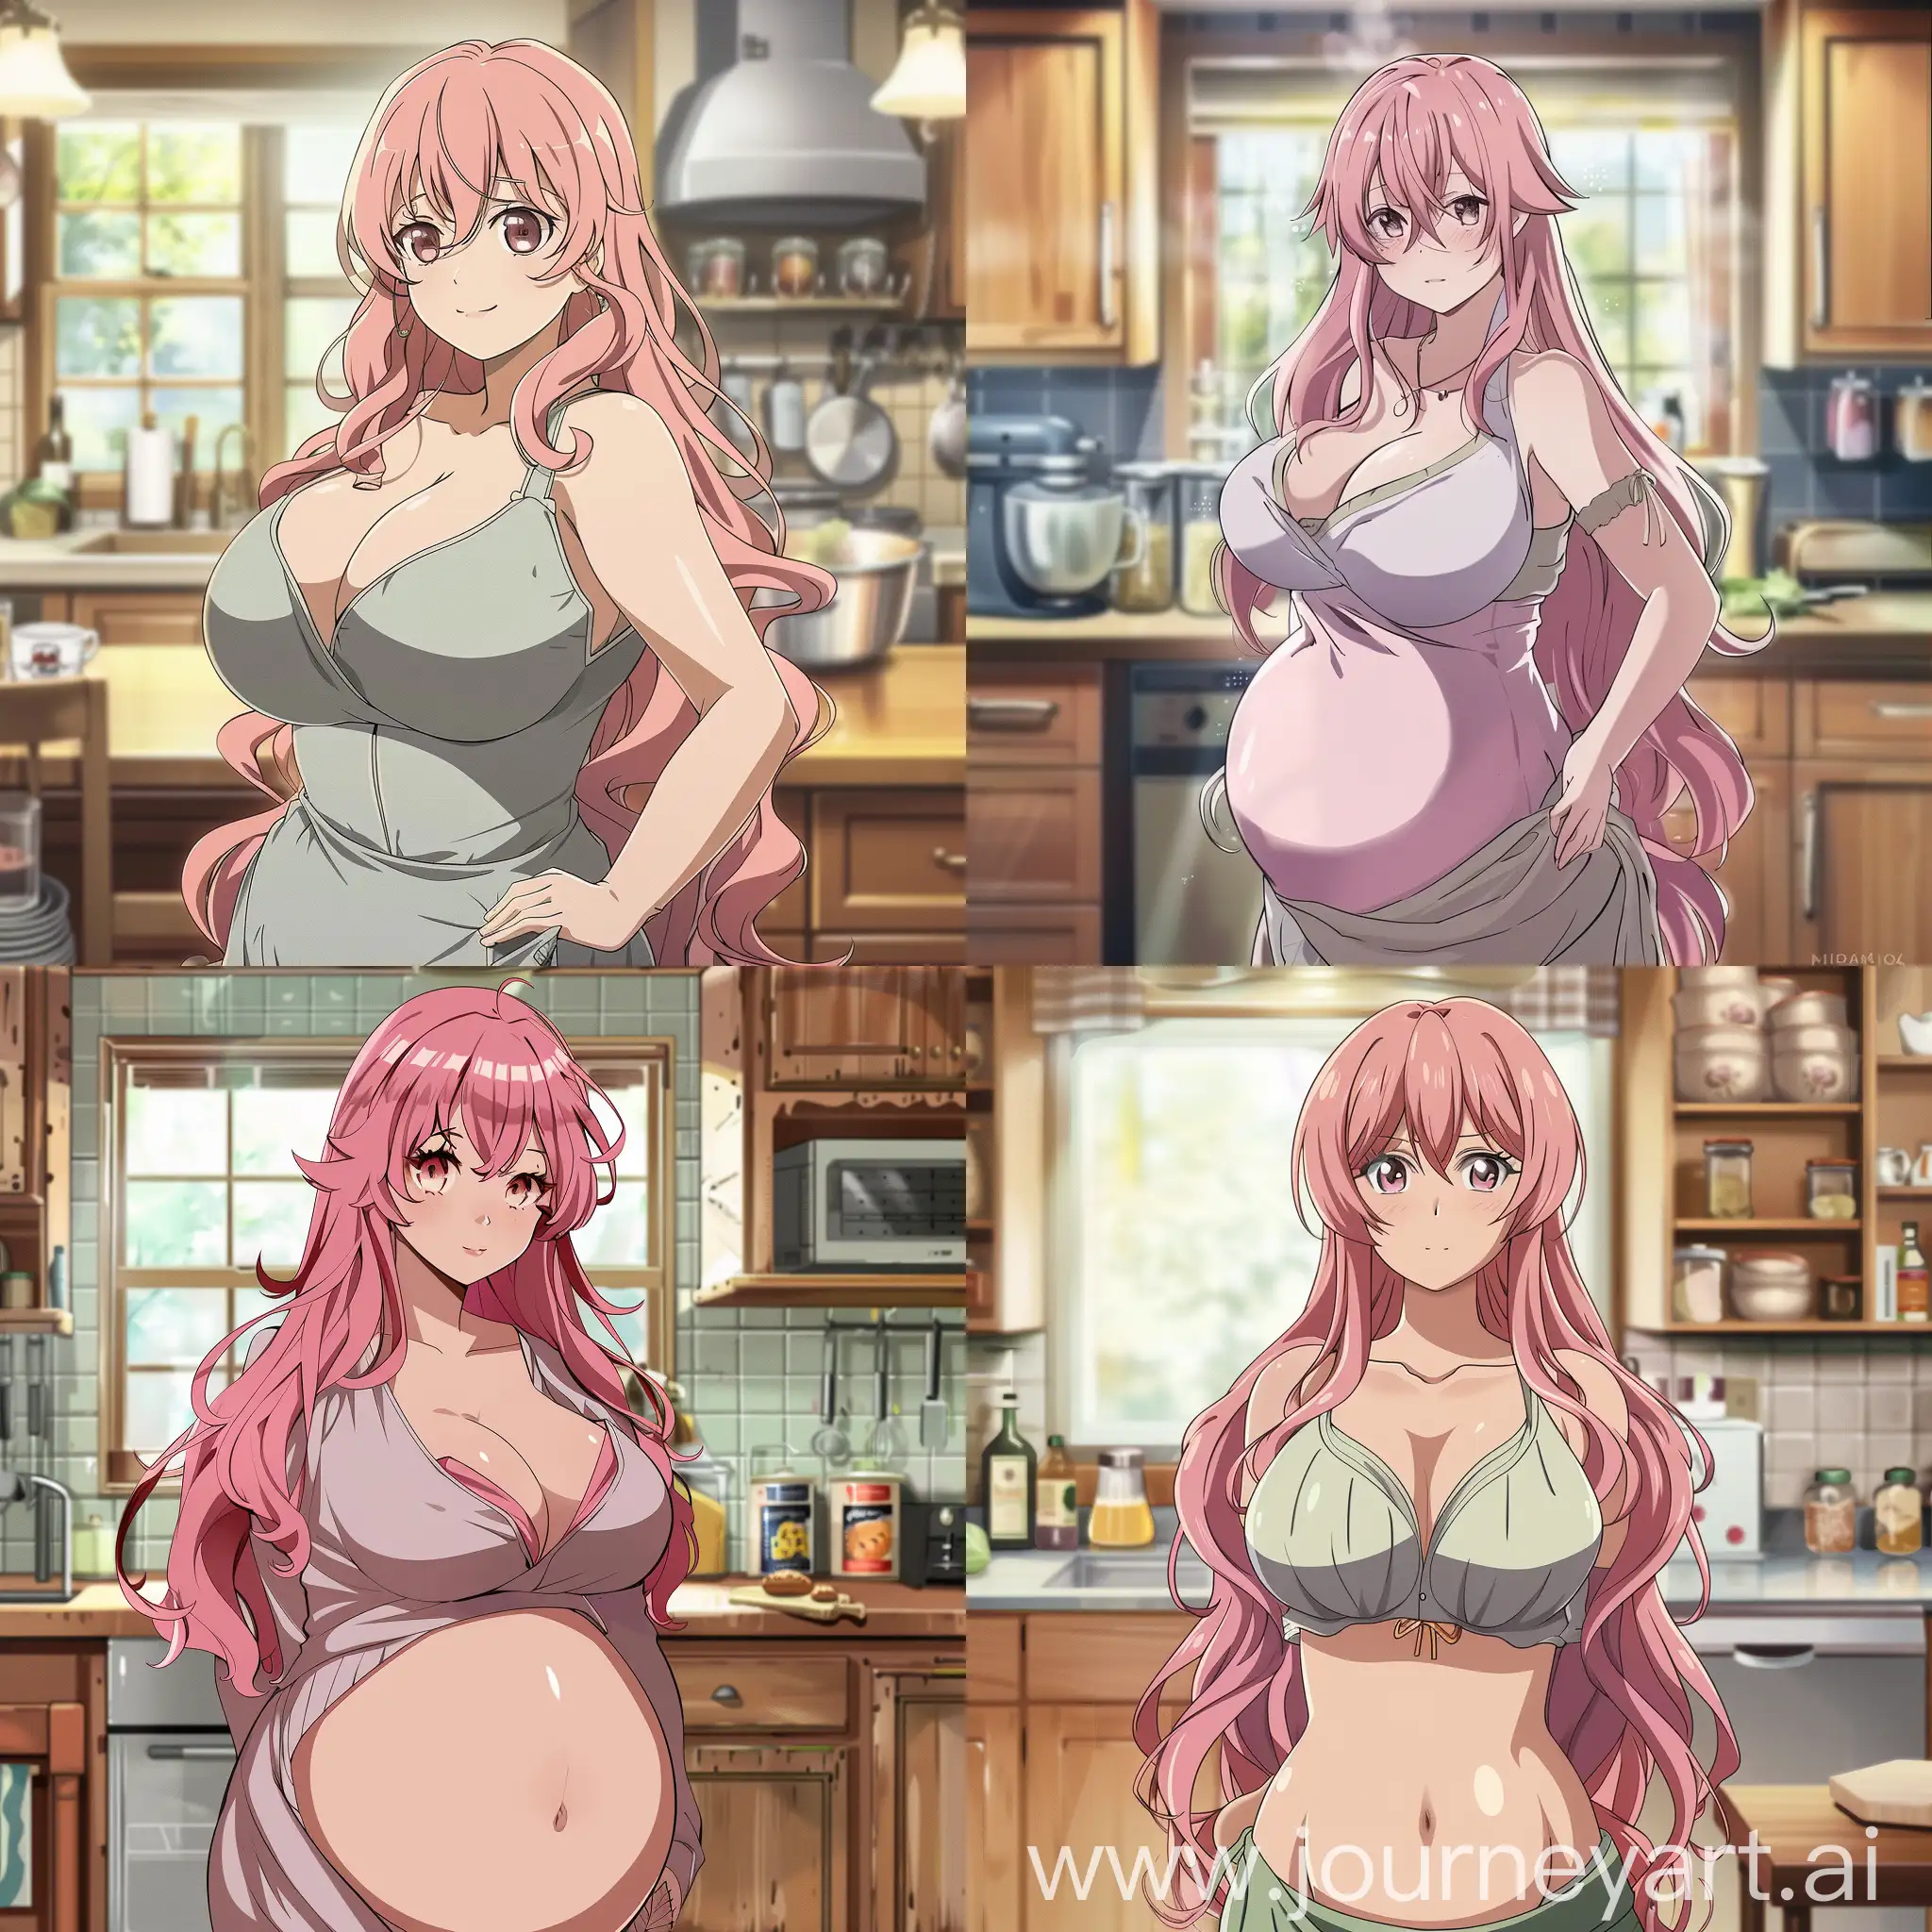 A yaoung woman with a curvy figure with long babypink hair wearing modest clothes, looks motherly and in a kitchen background, anime style